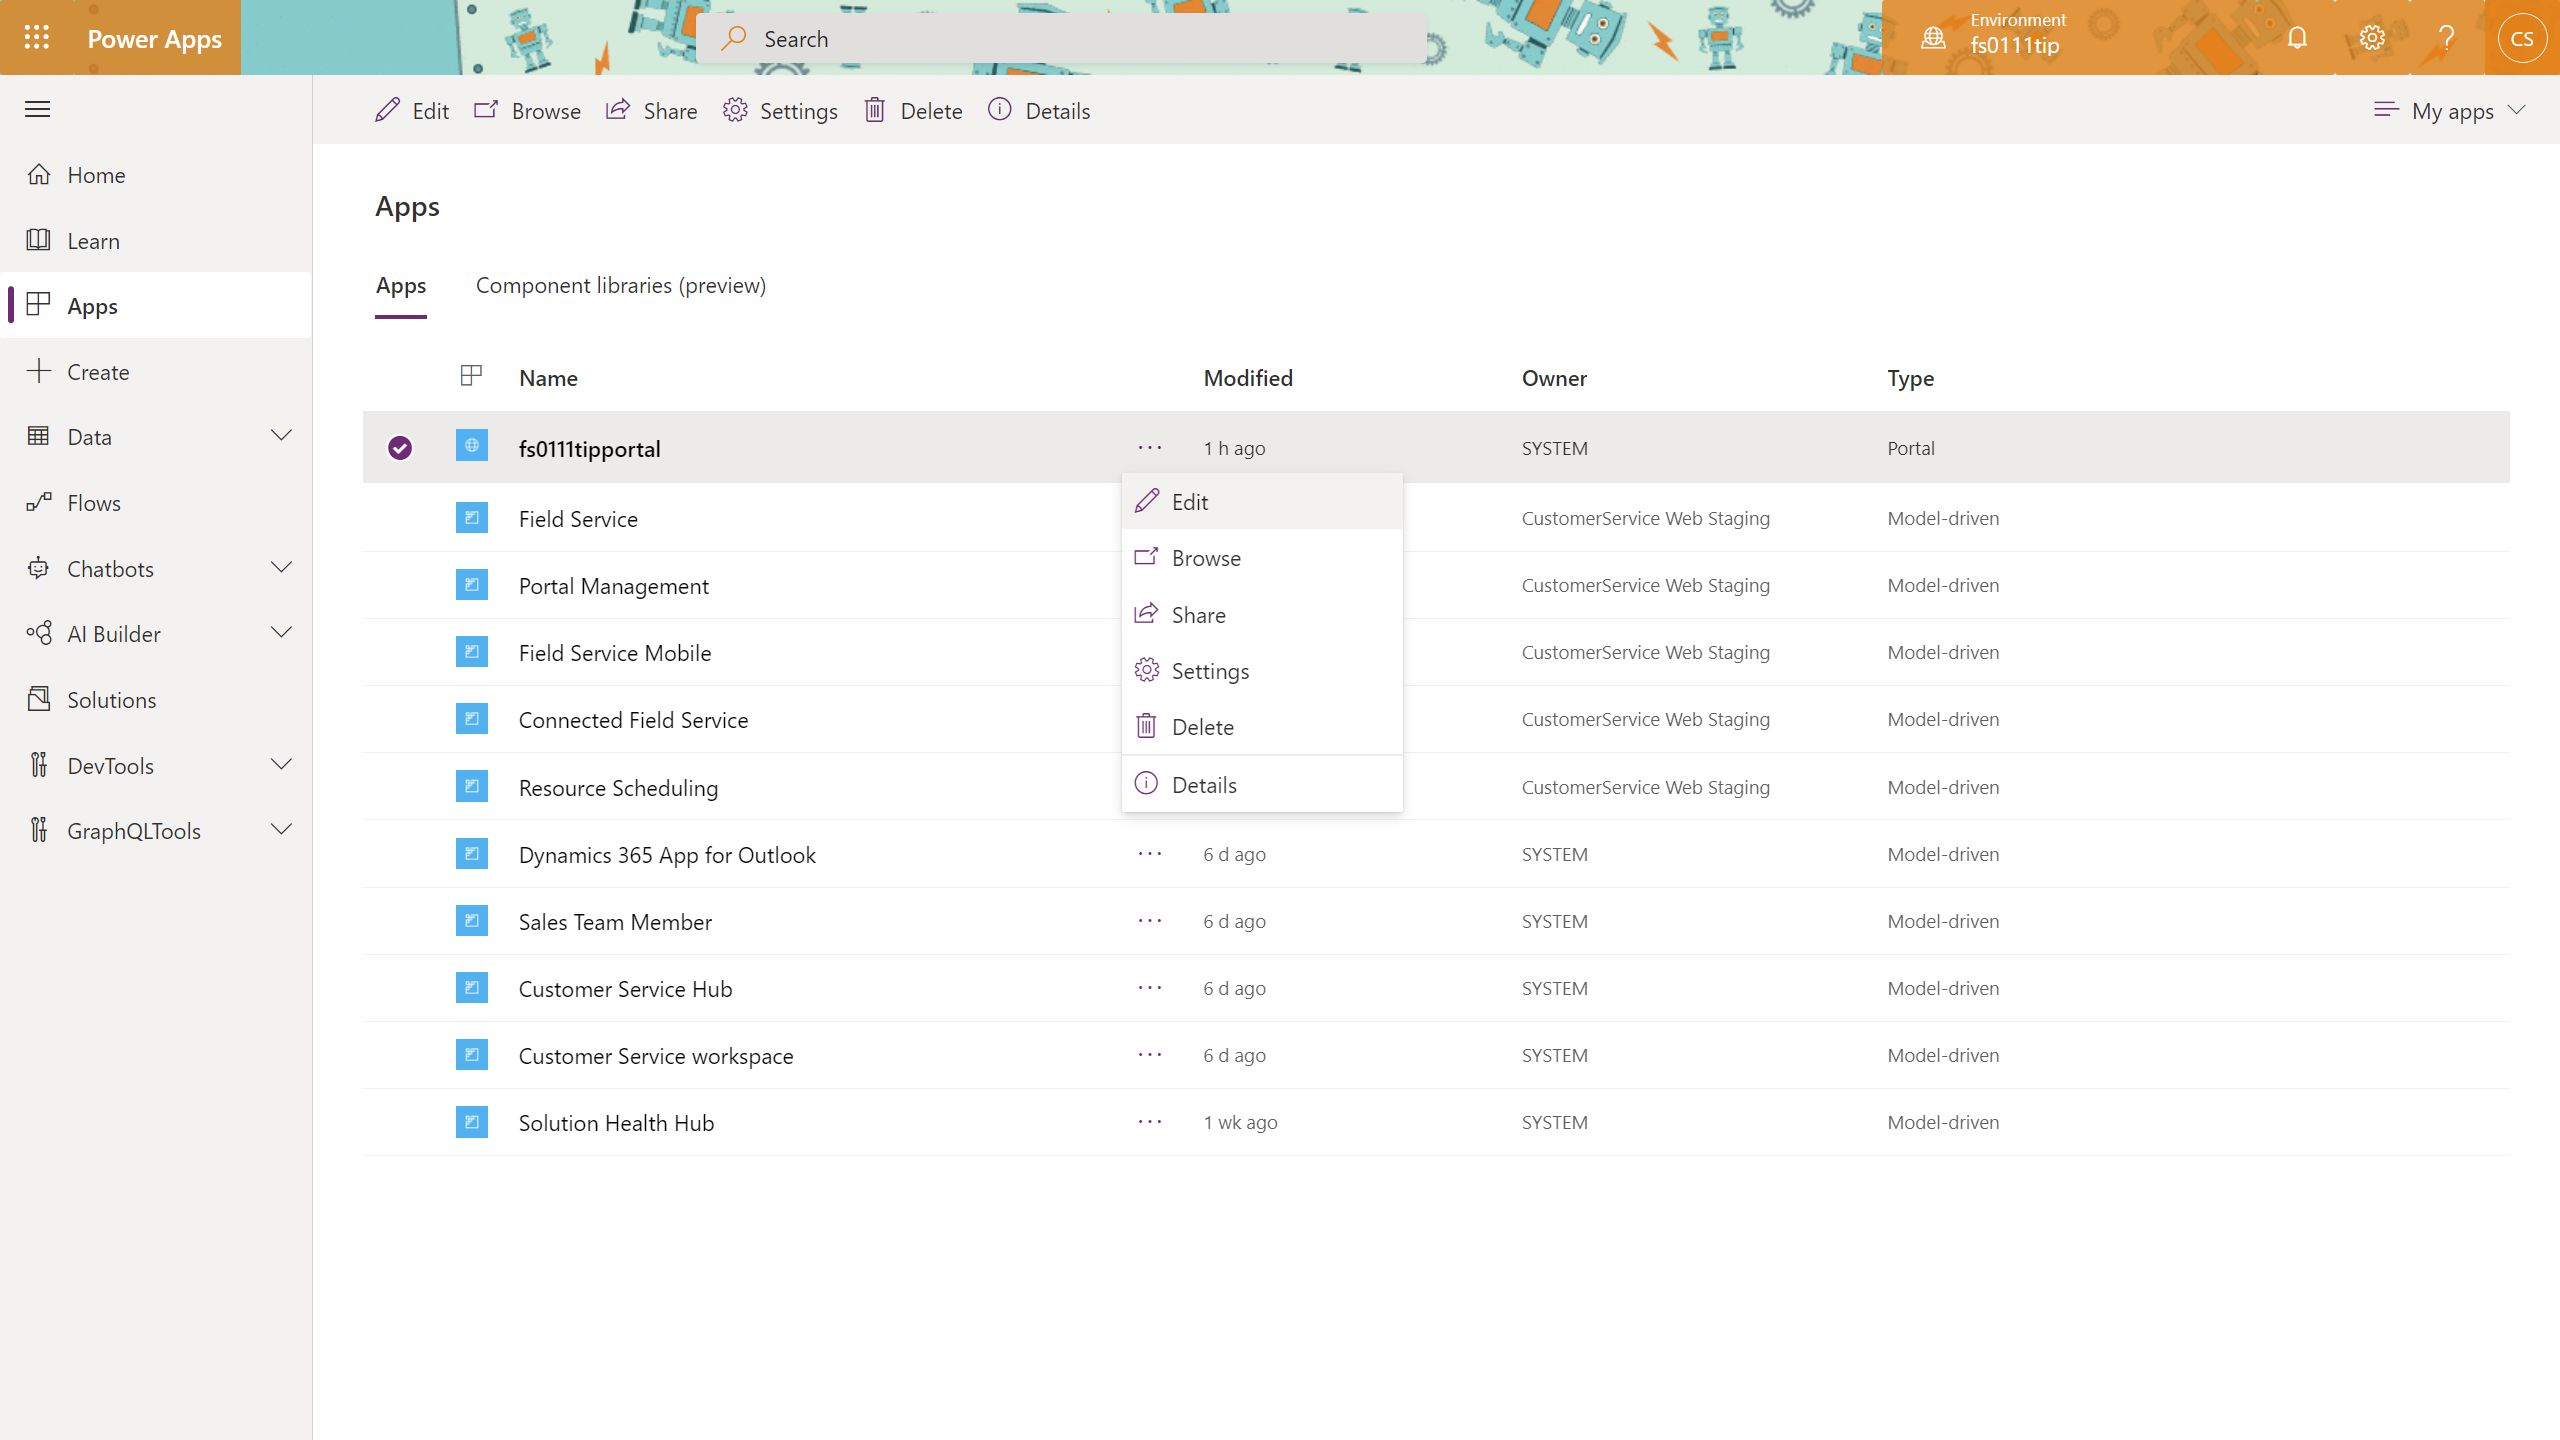 Screenshot of Power Apps showing the list of apps.